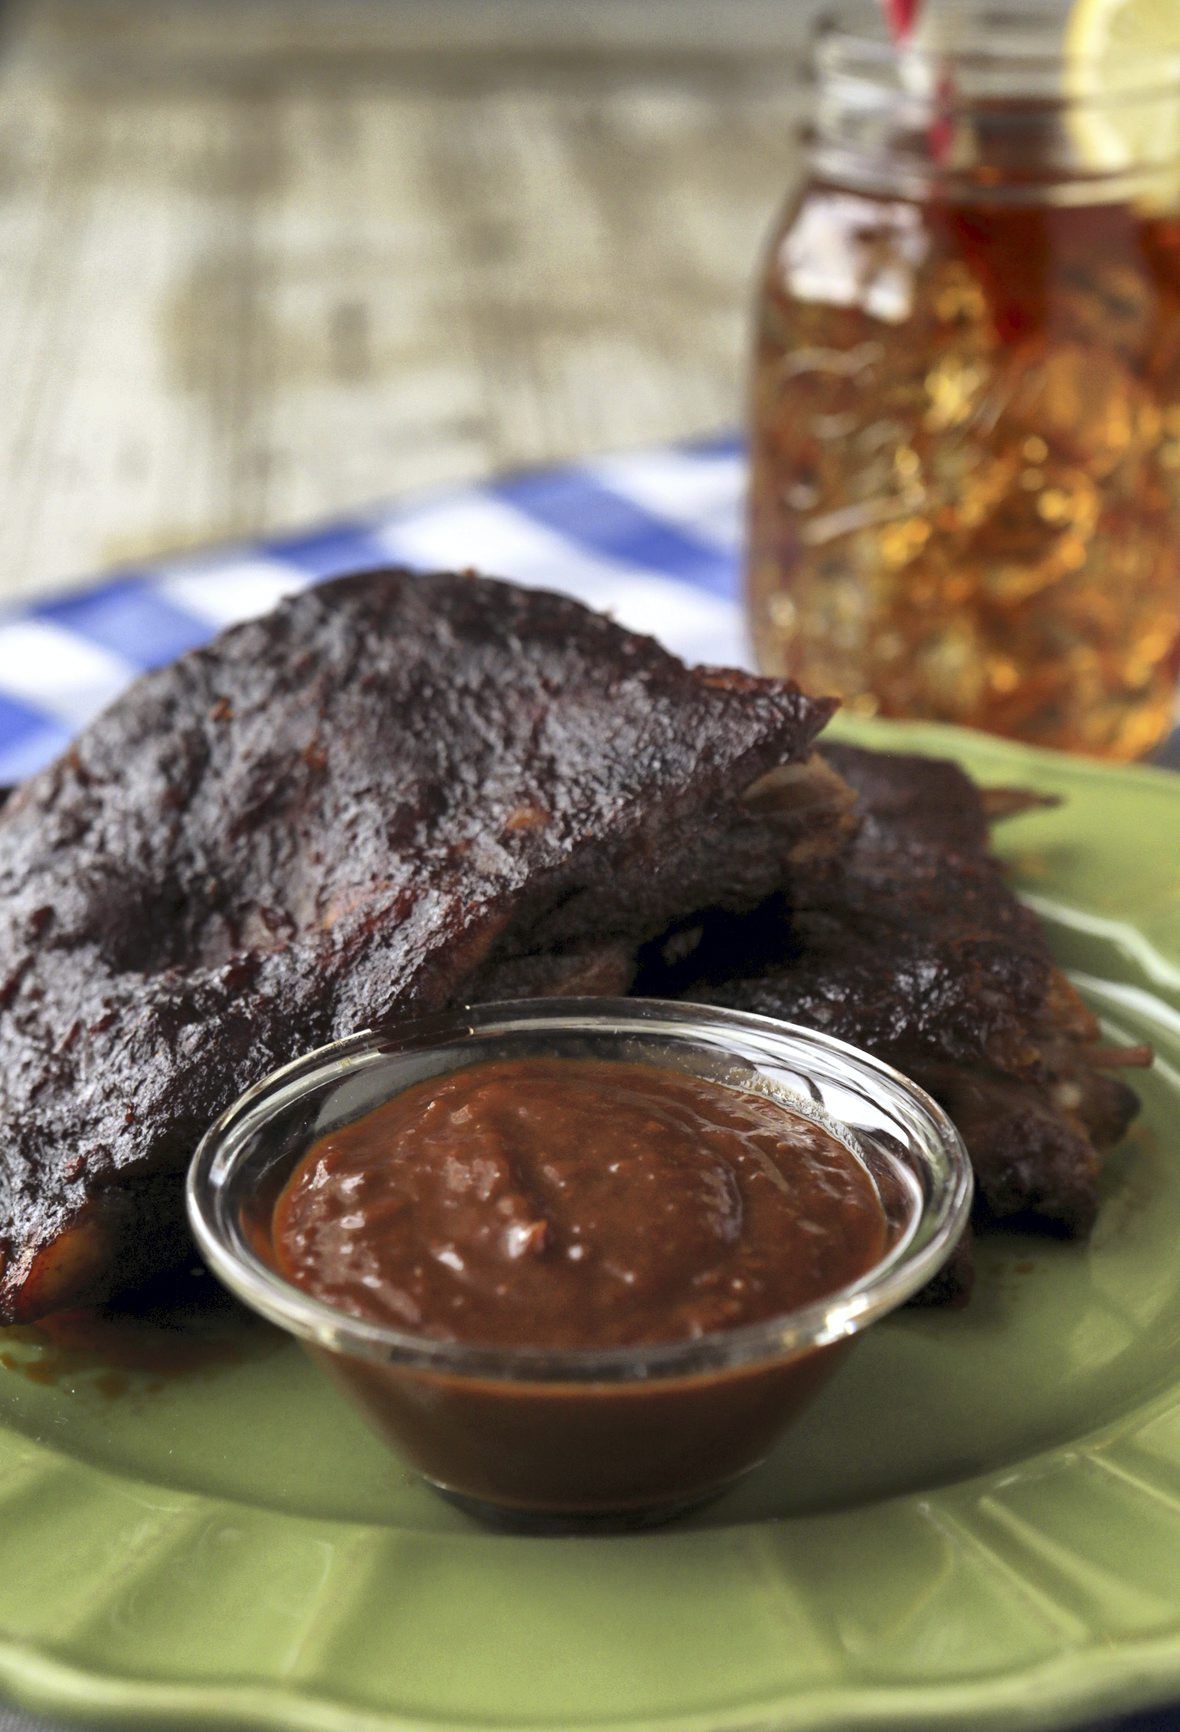 Make world-beating barbecue with your own sumptuous sauce (3 mouth-watering recipes!)